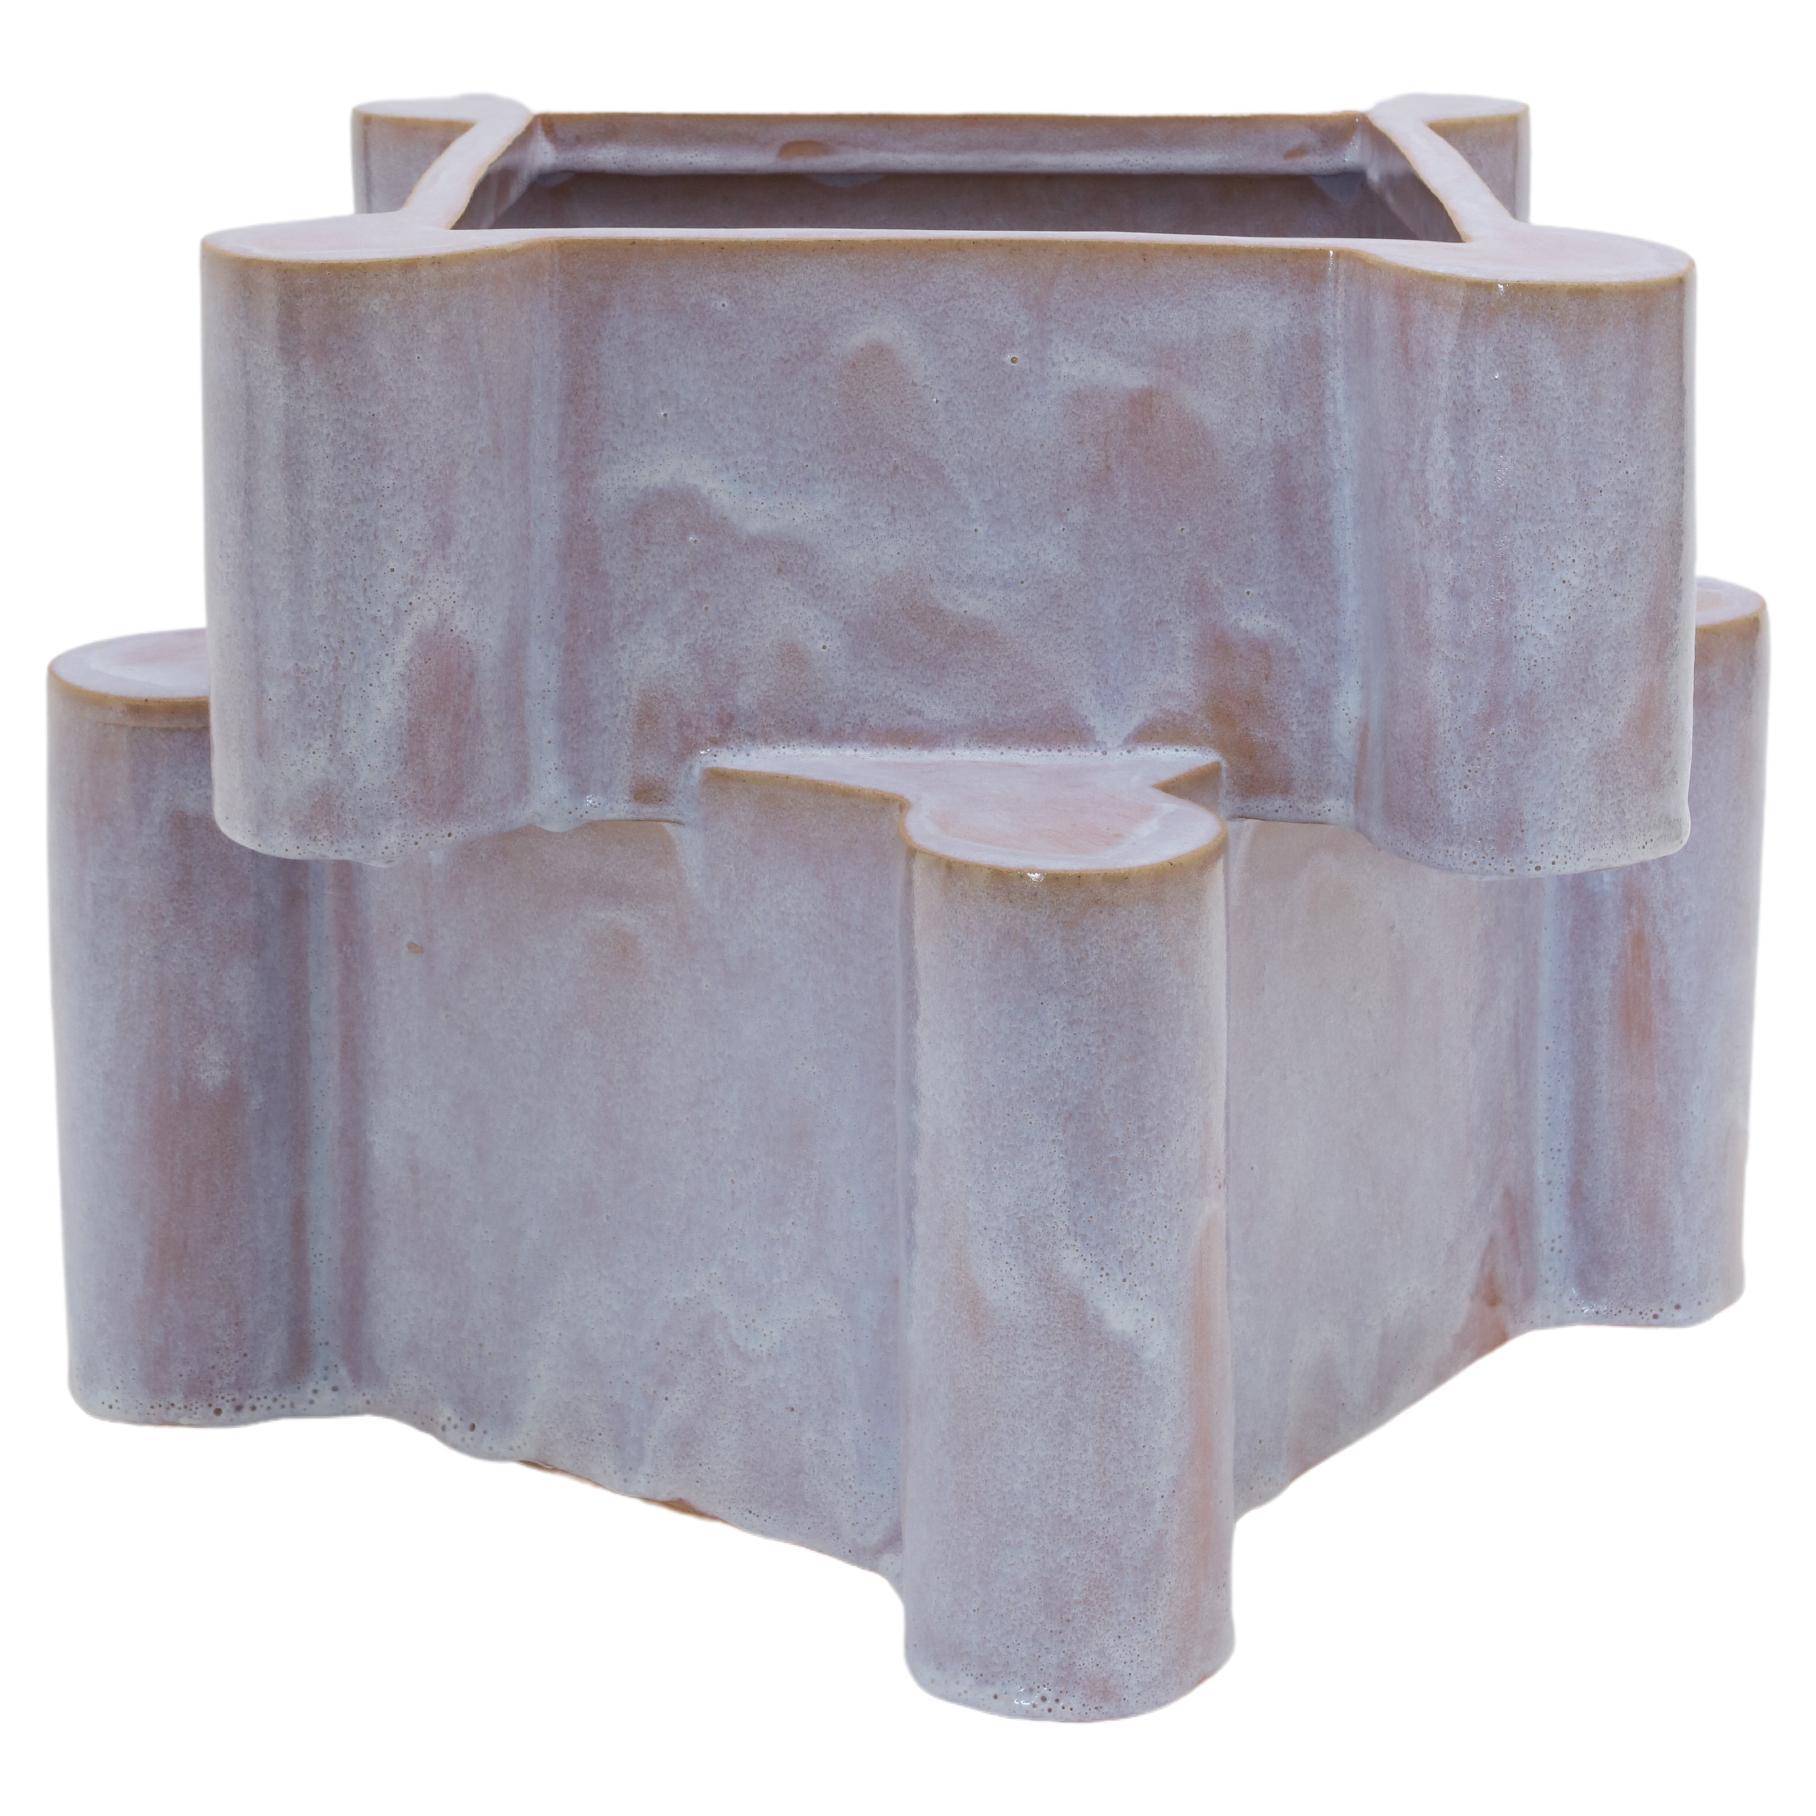 Twisted Castle Ceramic Planter in Pink Ice by BZIPPY